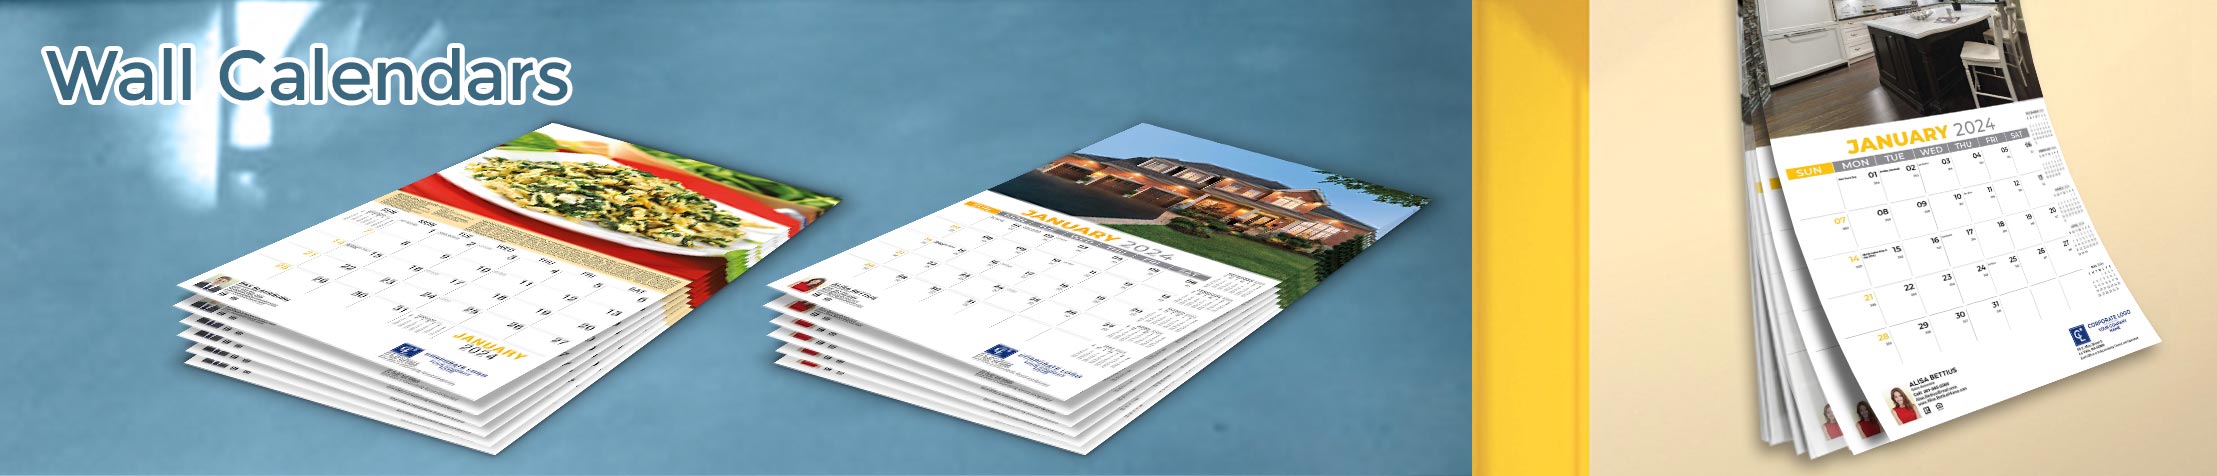 Coldwell Banker Real Estate Wall Calendars - Coldwell Banker  2019 wall calendars | BestPrintBuy.com